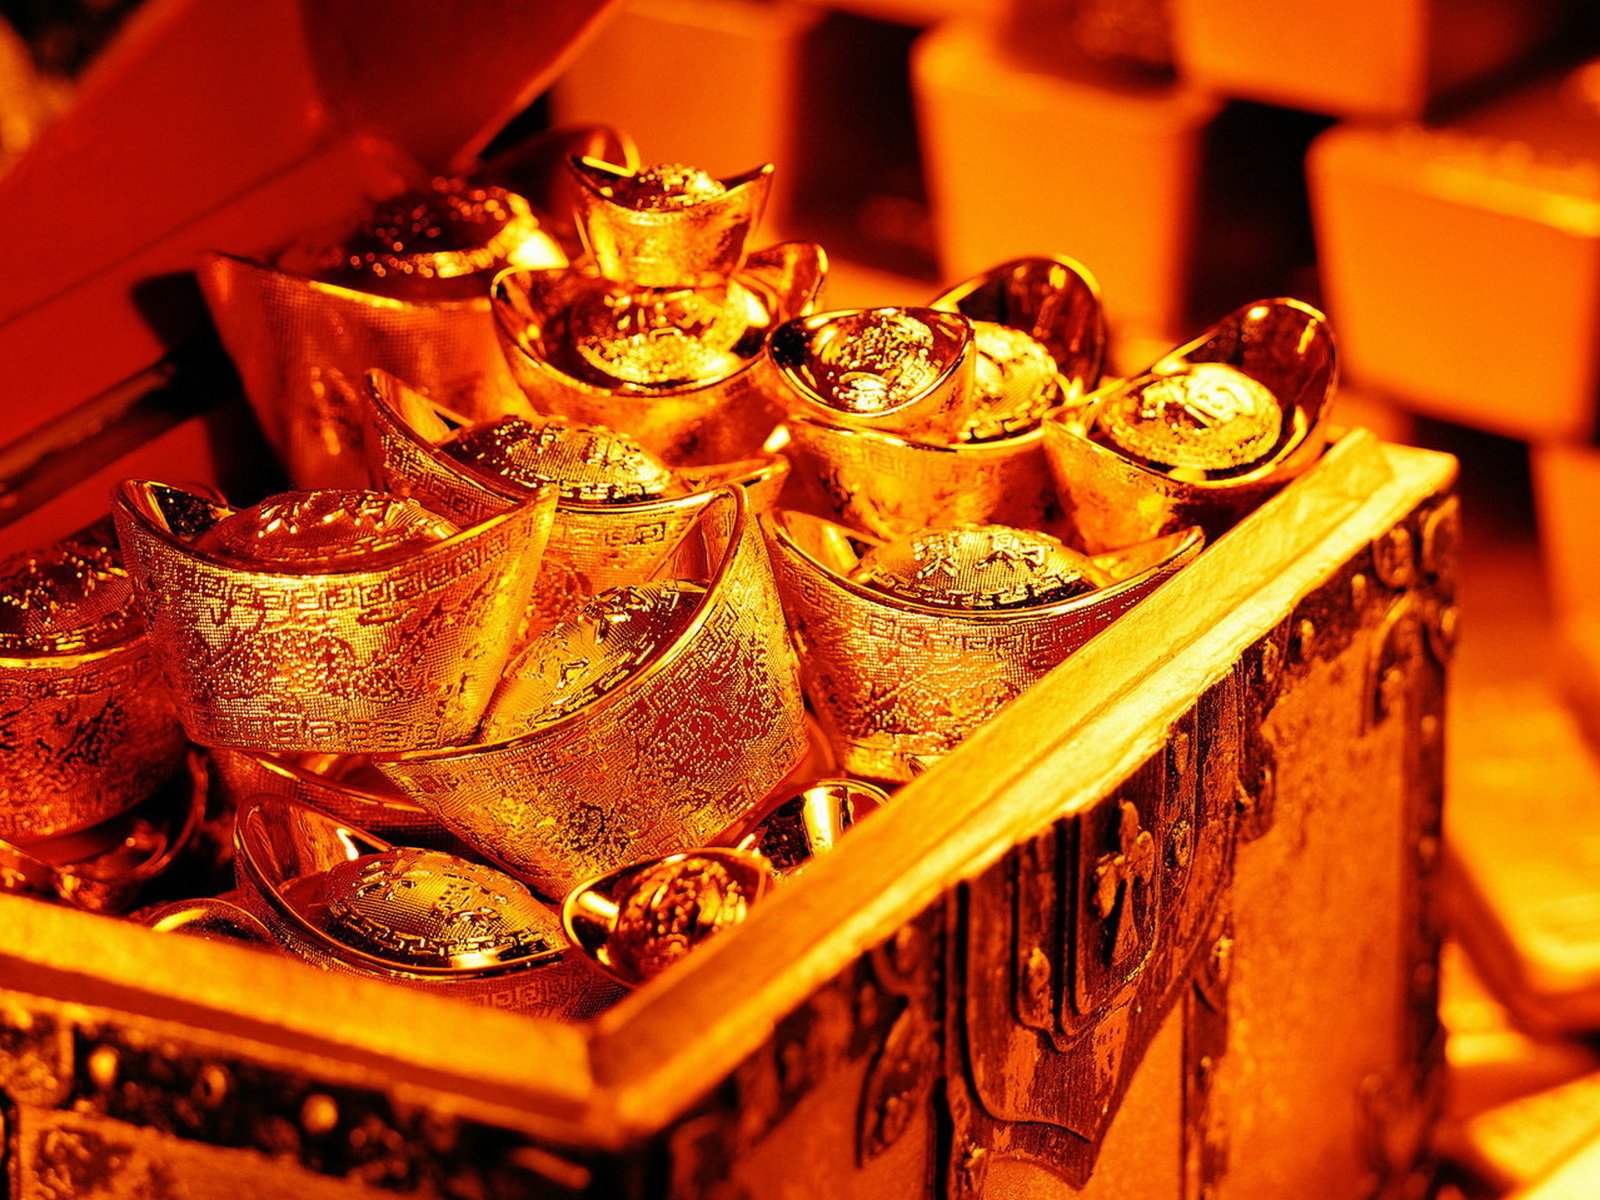 Coffer with golden thing